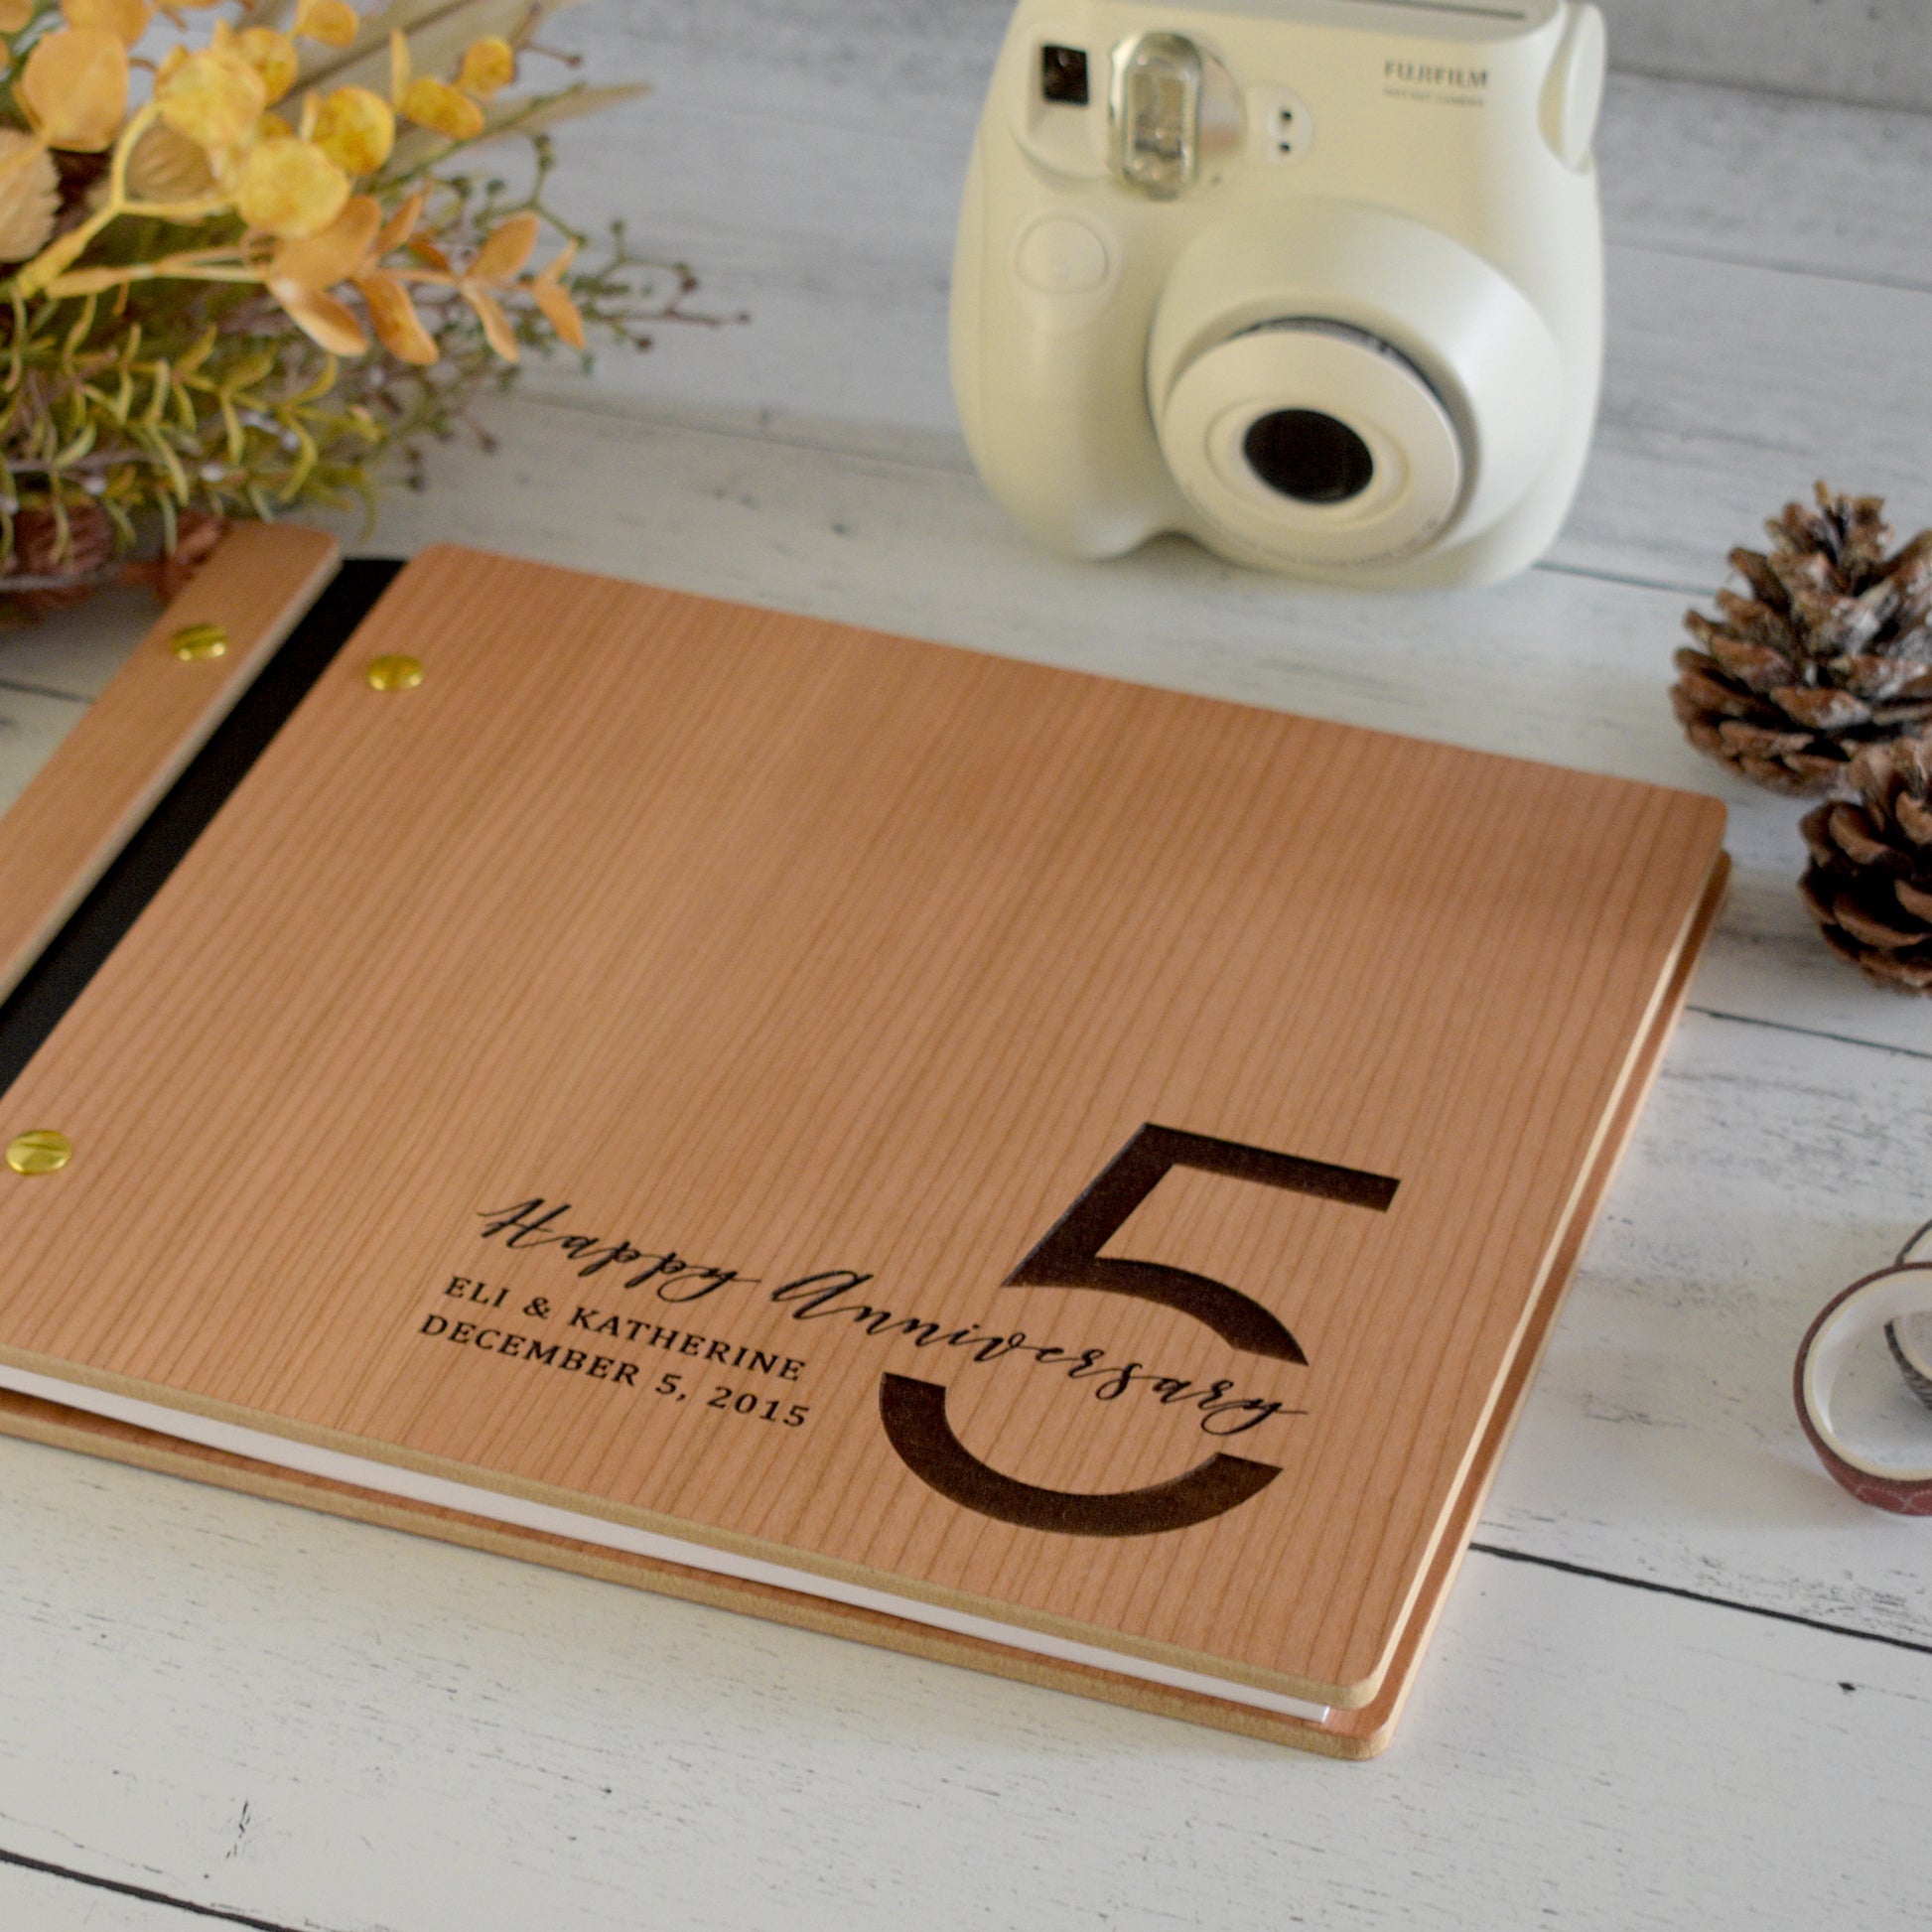 An 8.5x11" guest book lies on a table. Made of cherry wood, black vegan leather binding, and gold hardware. The front cover reads “Happy Anniversary, Eli & Katherine, December 5th, 2015."